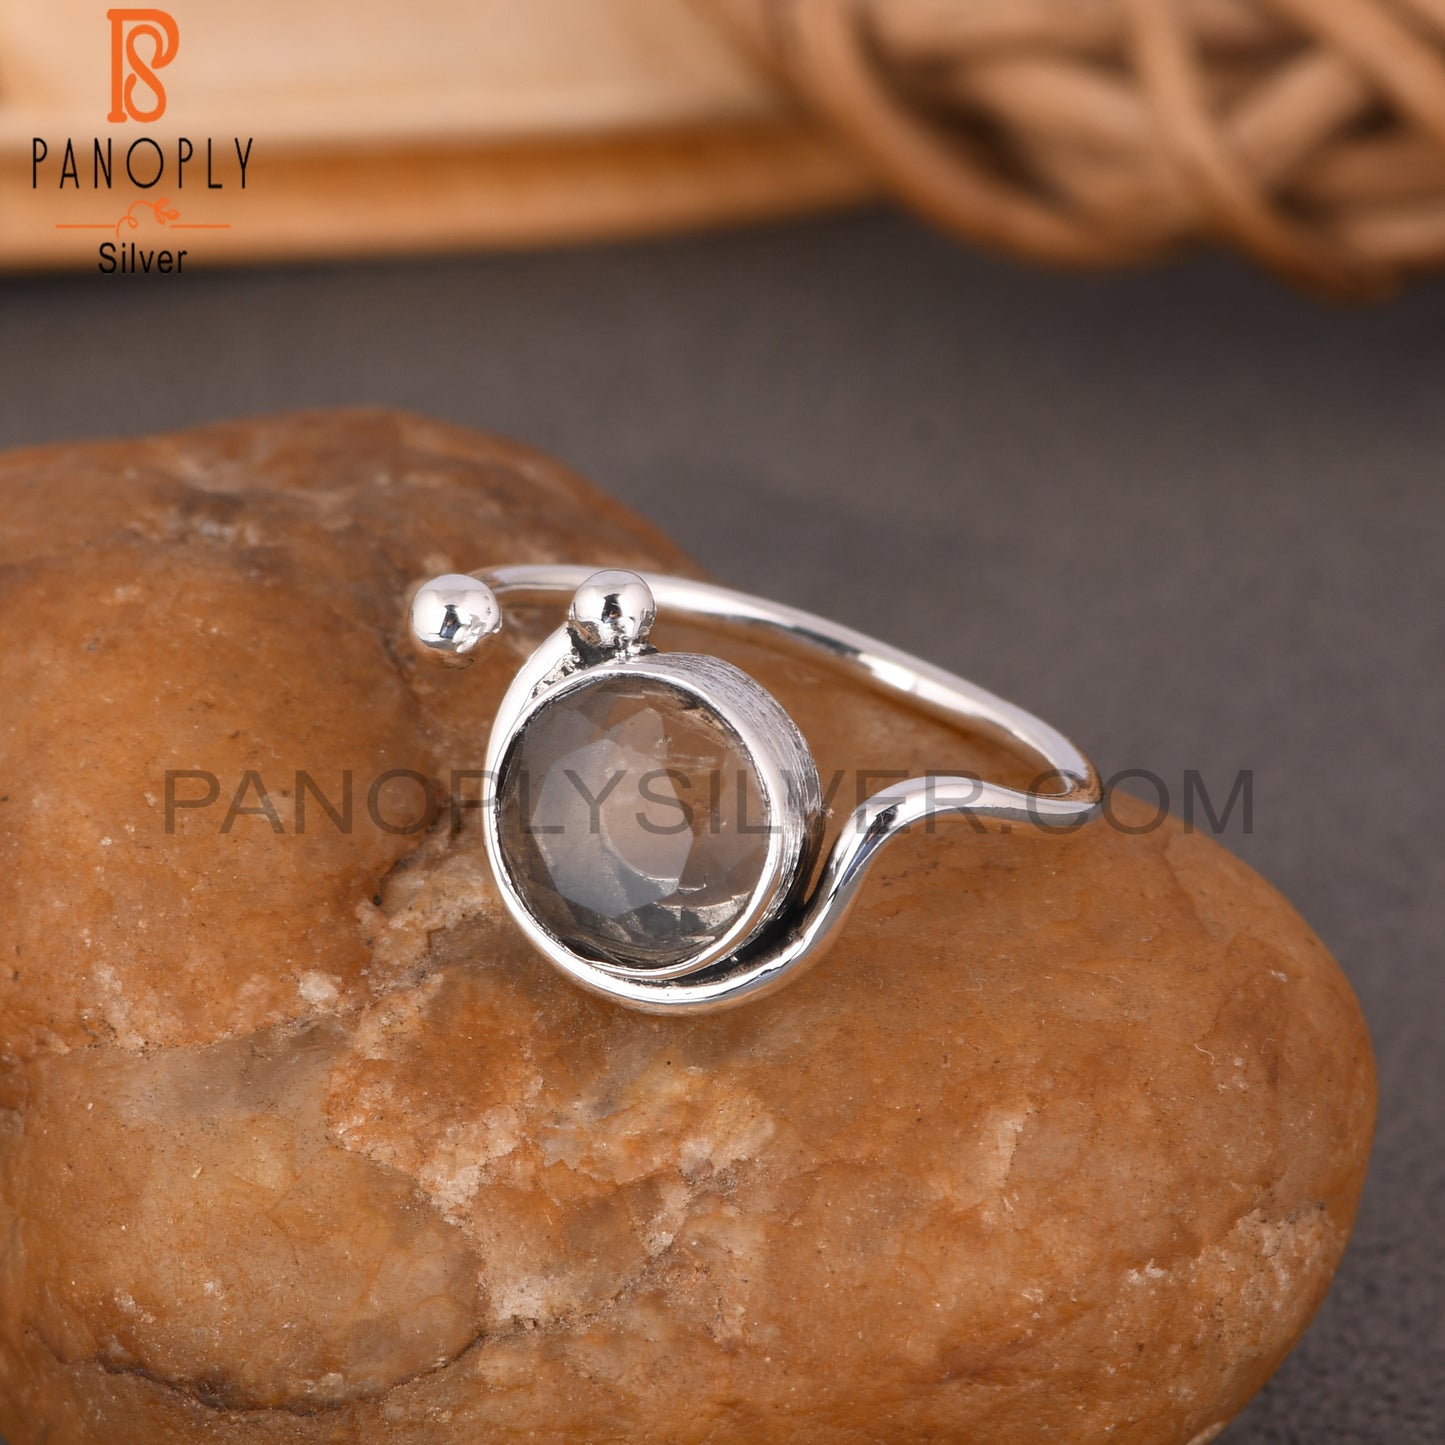 Fluorite Round 925 Sterling Silver Ring